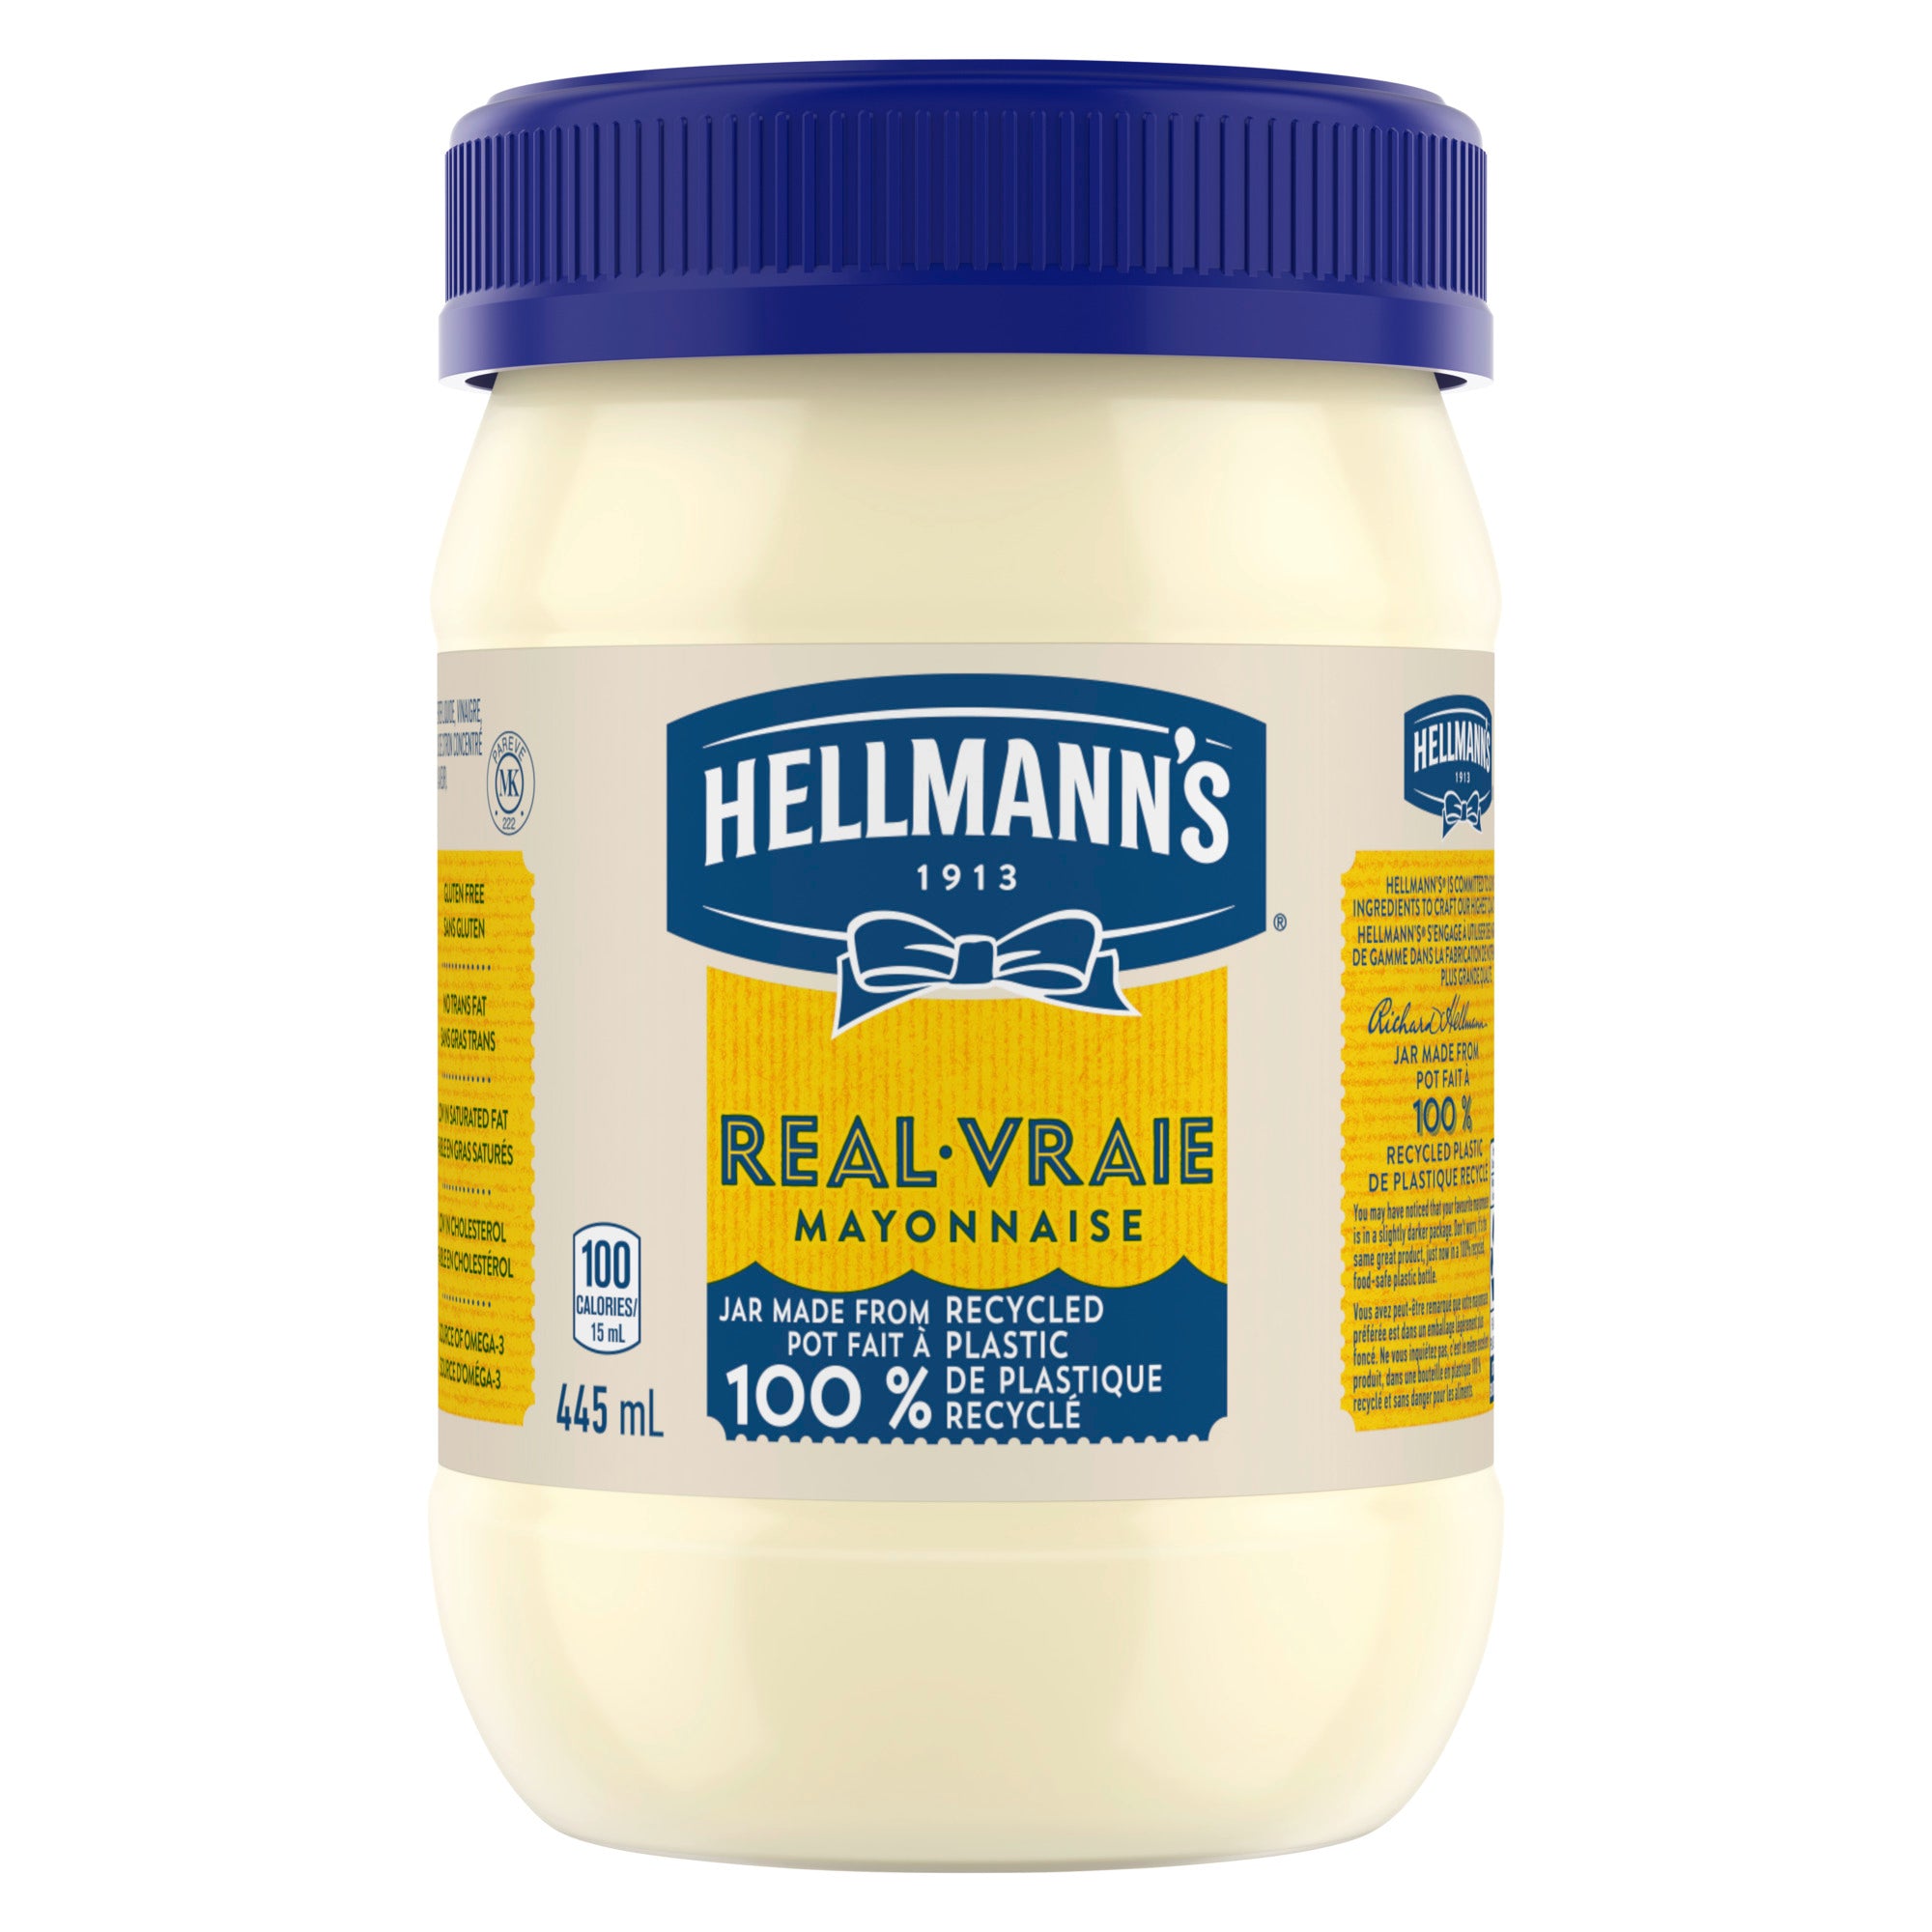 Showing the front angle view of the Hellmann's® Real Mayonnaise 445ml product.